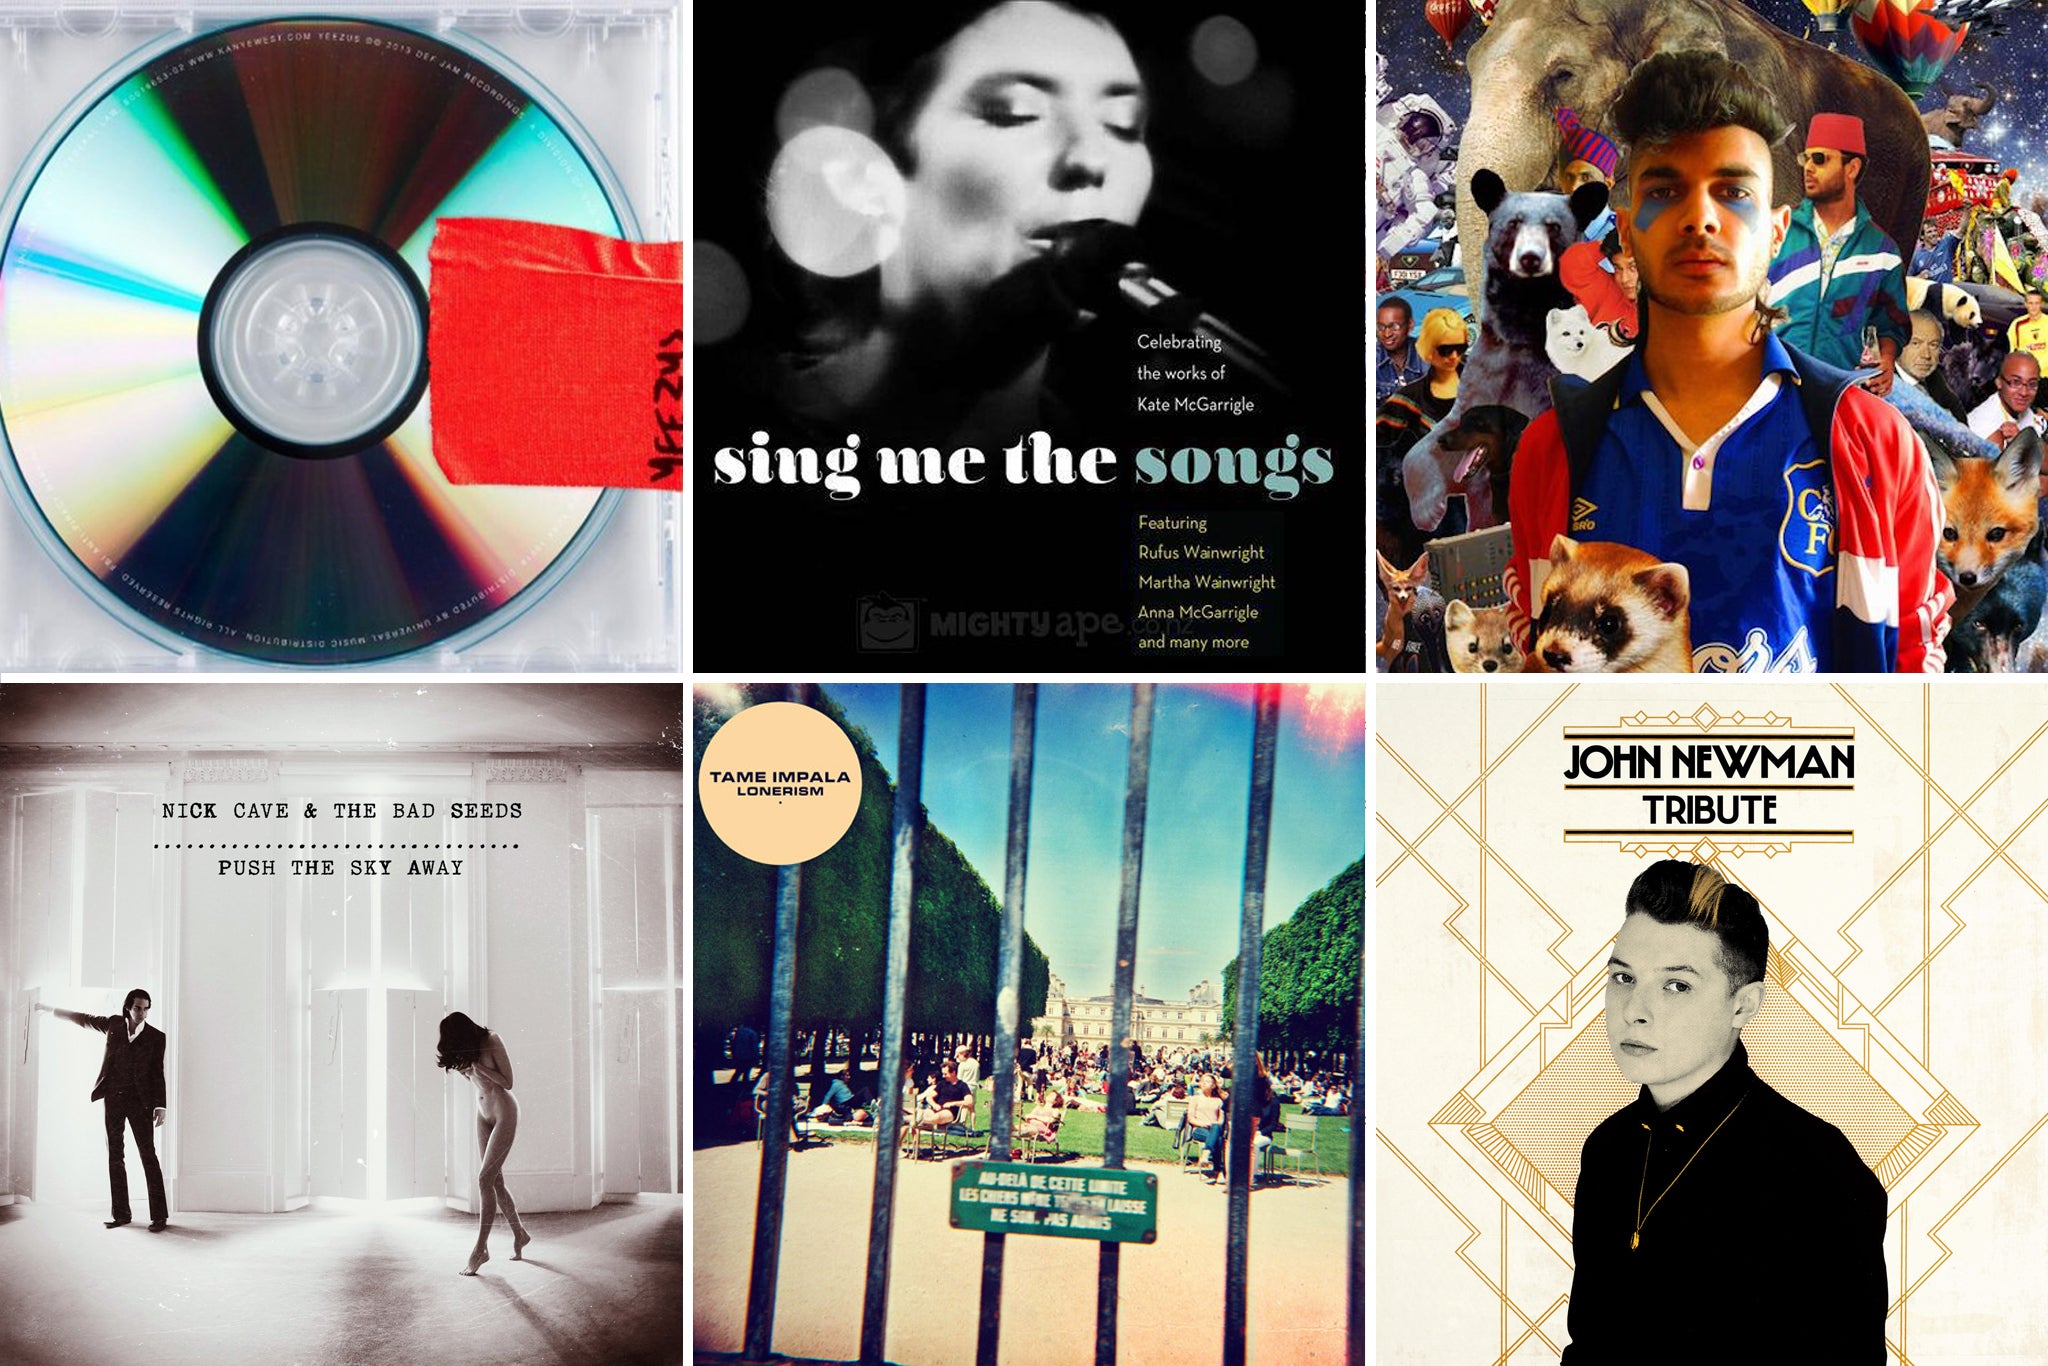 Albums of the year (from top left): Yeezus, Sing me the songs: Celebrating the works of Kate McGarrigle, Demos, Nick Cave and the Bad Seeds, Lonerism, Tribute